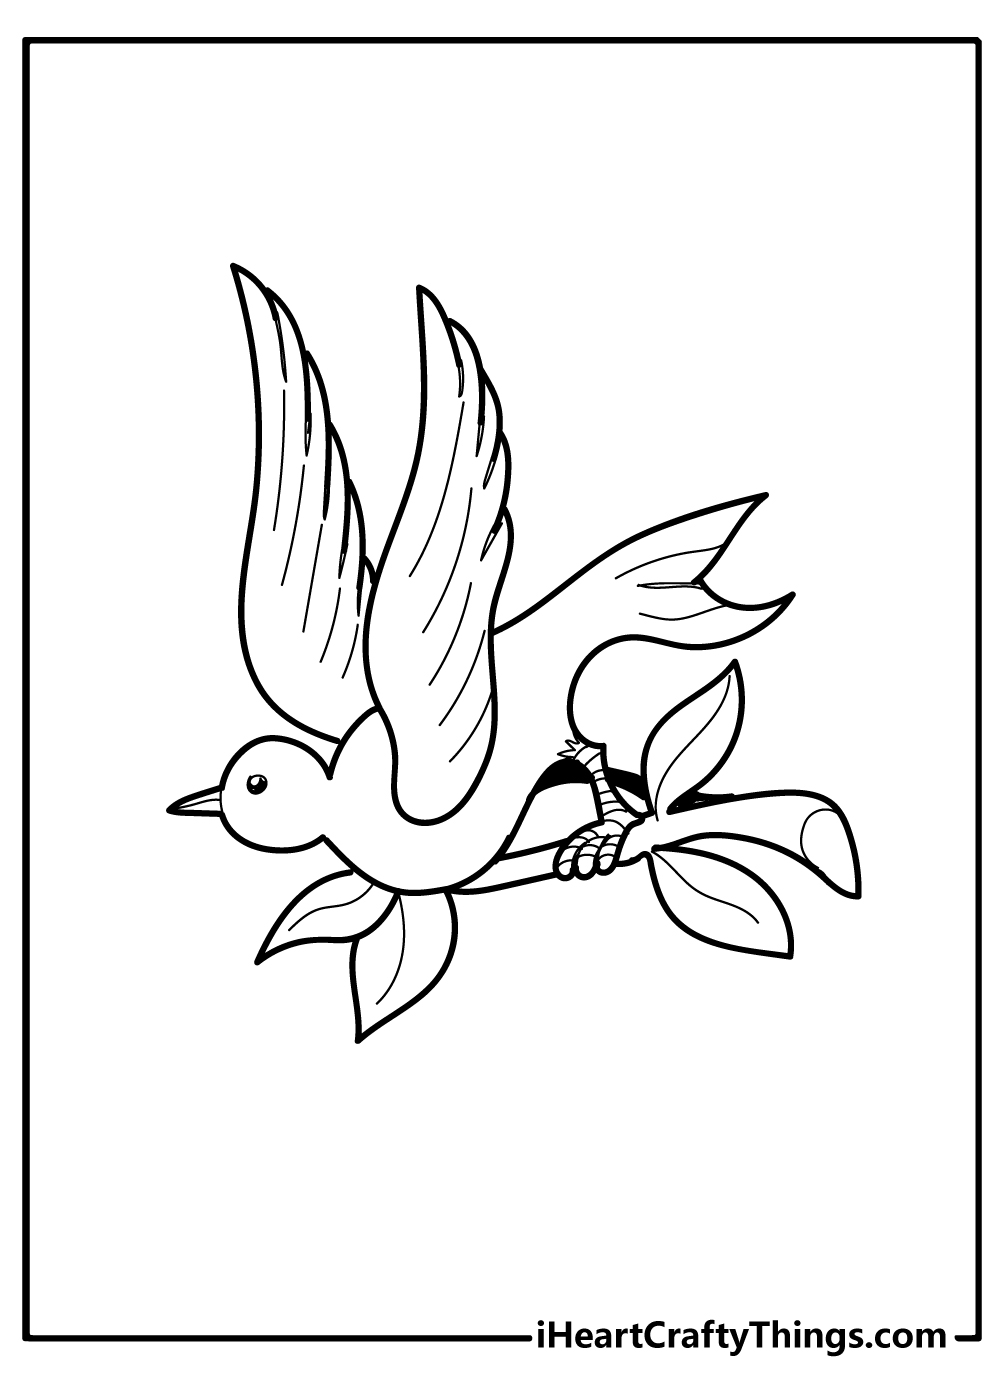 Tattoos Coloring Pages free pdf download